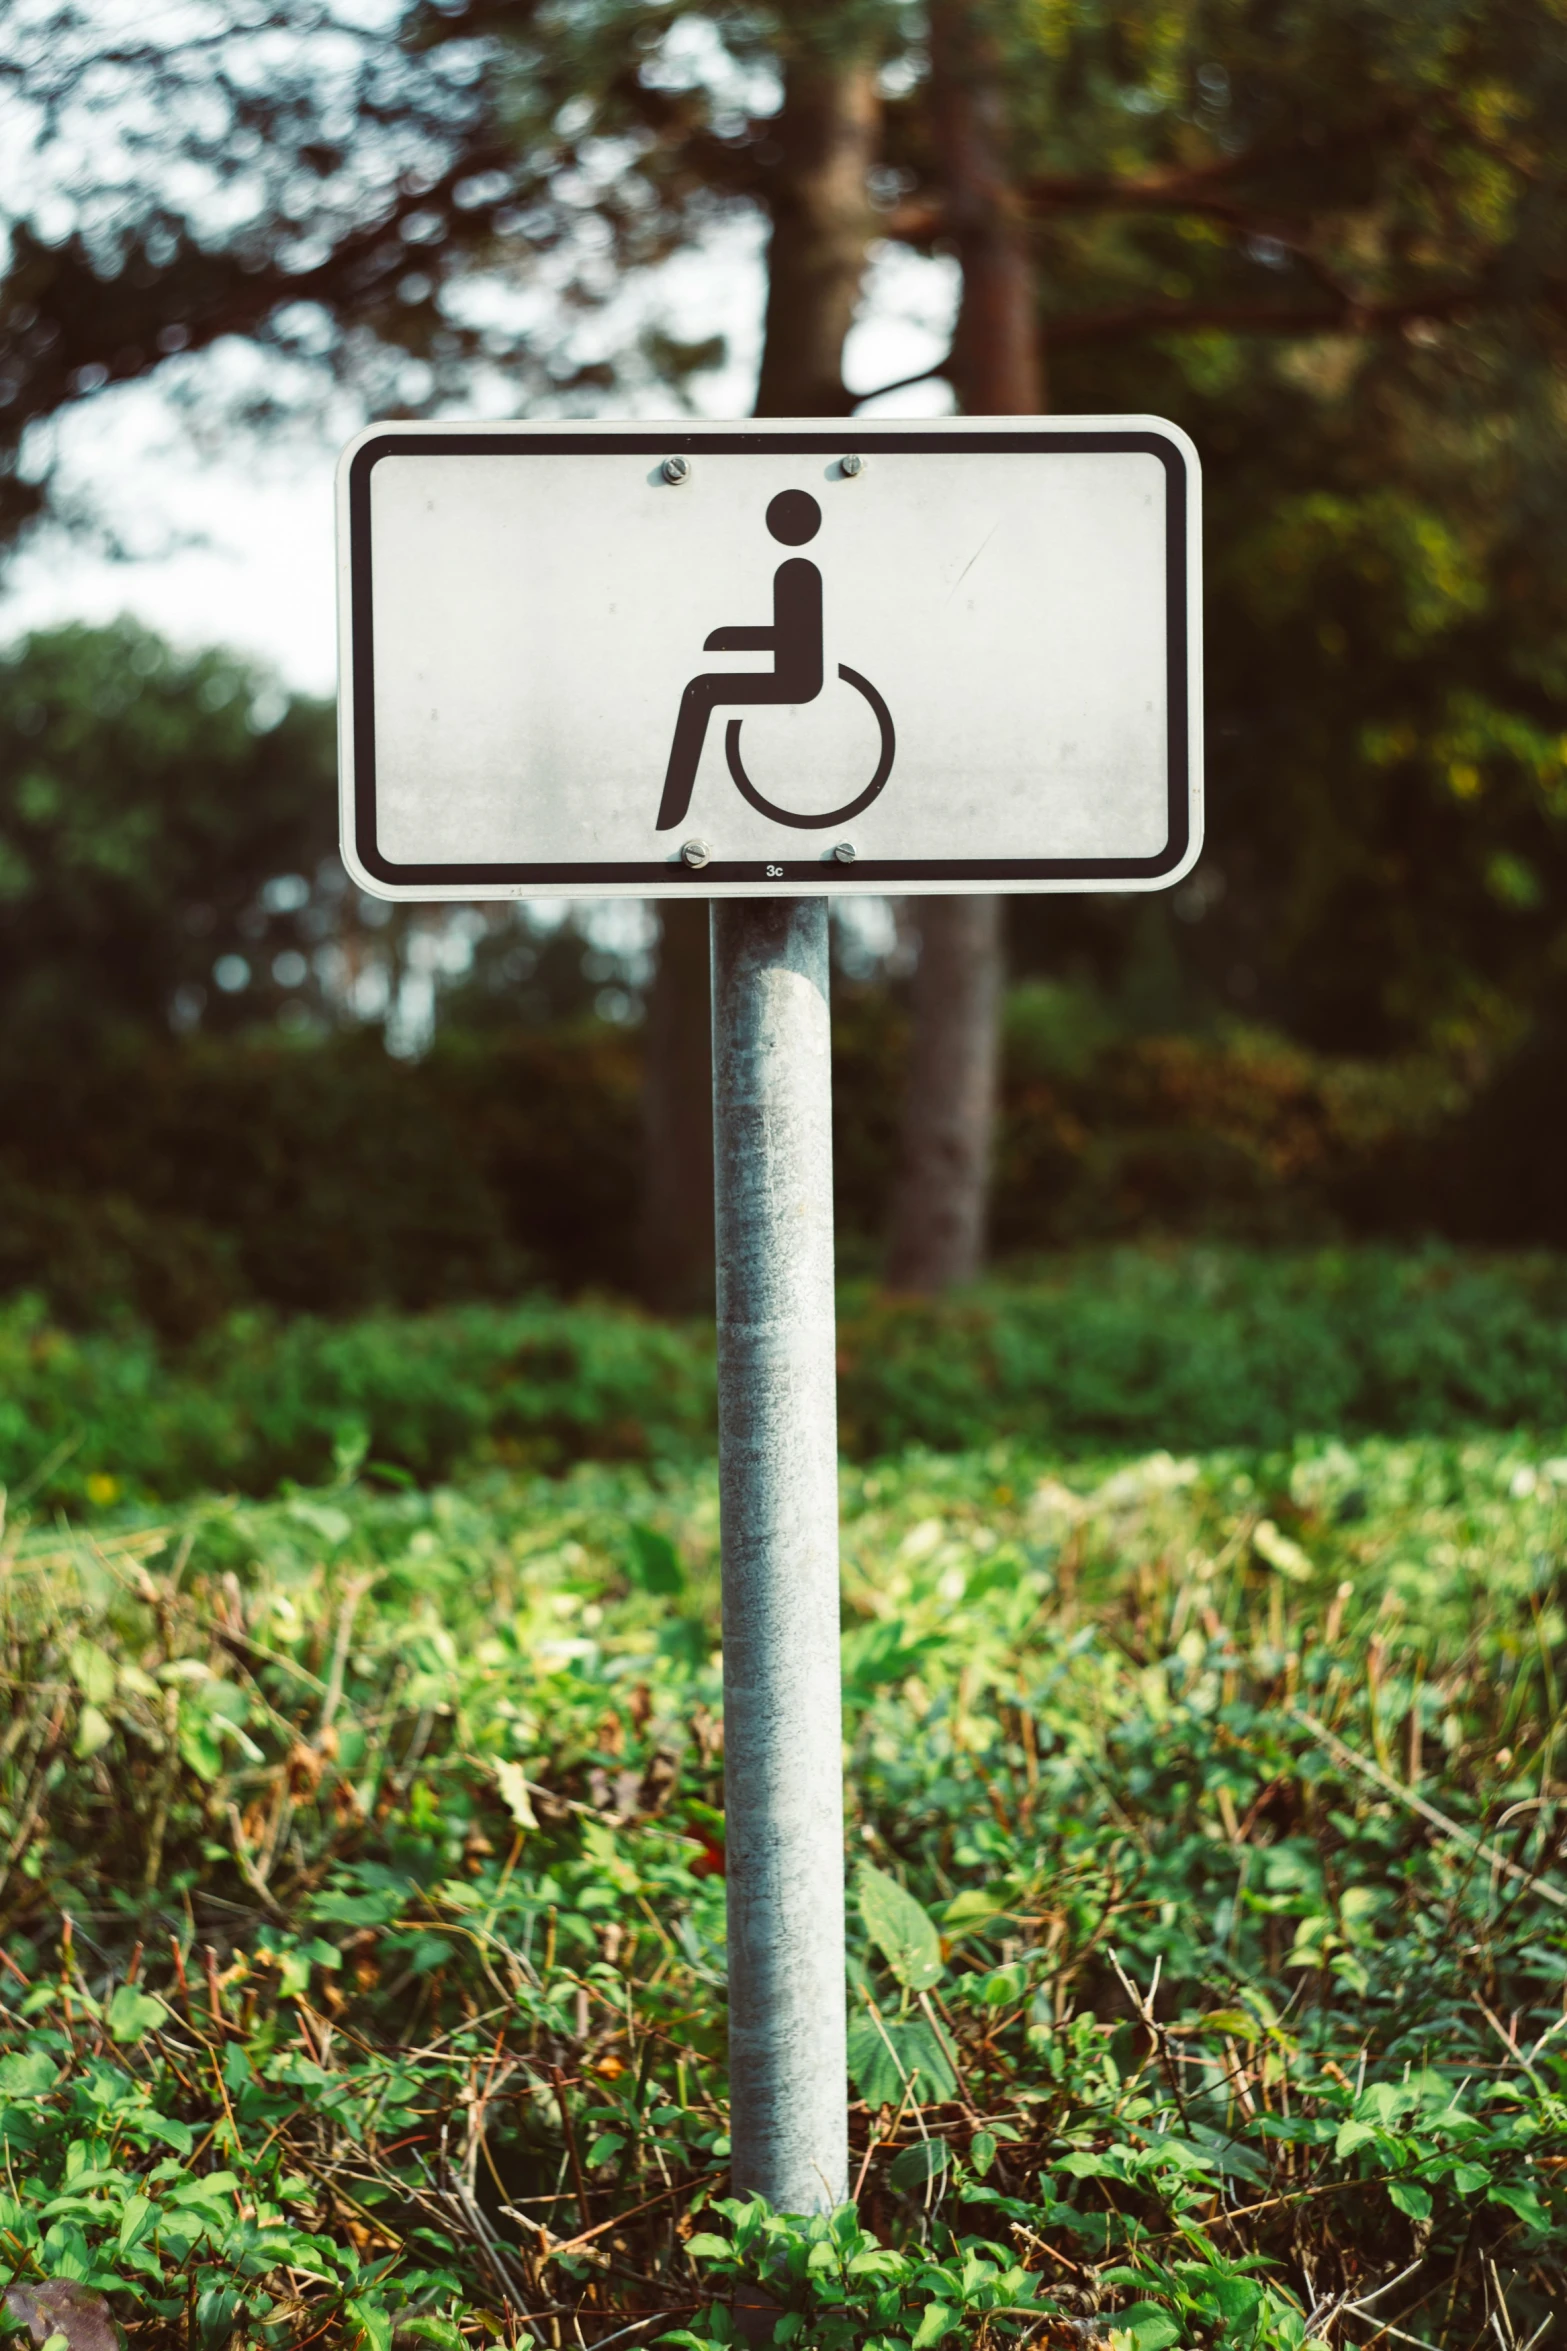 a road sign indicates handicapped parking is posted on a pole